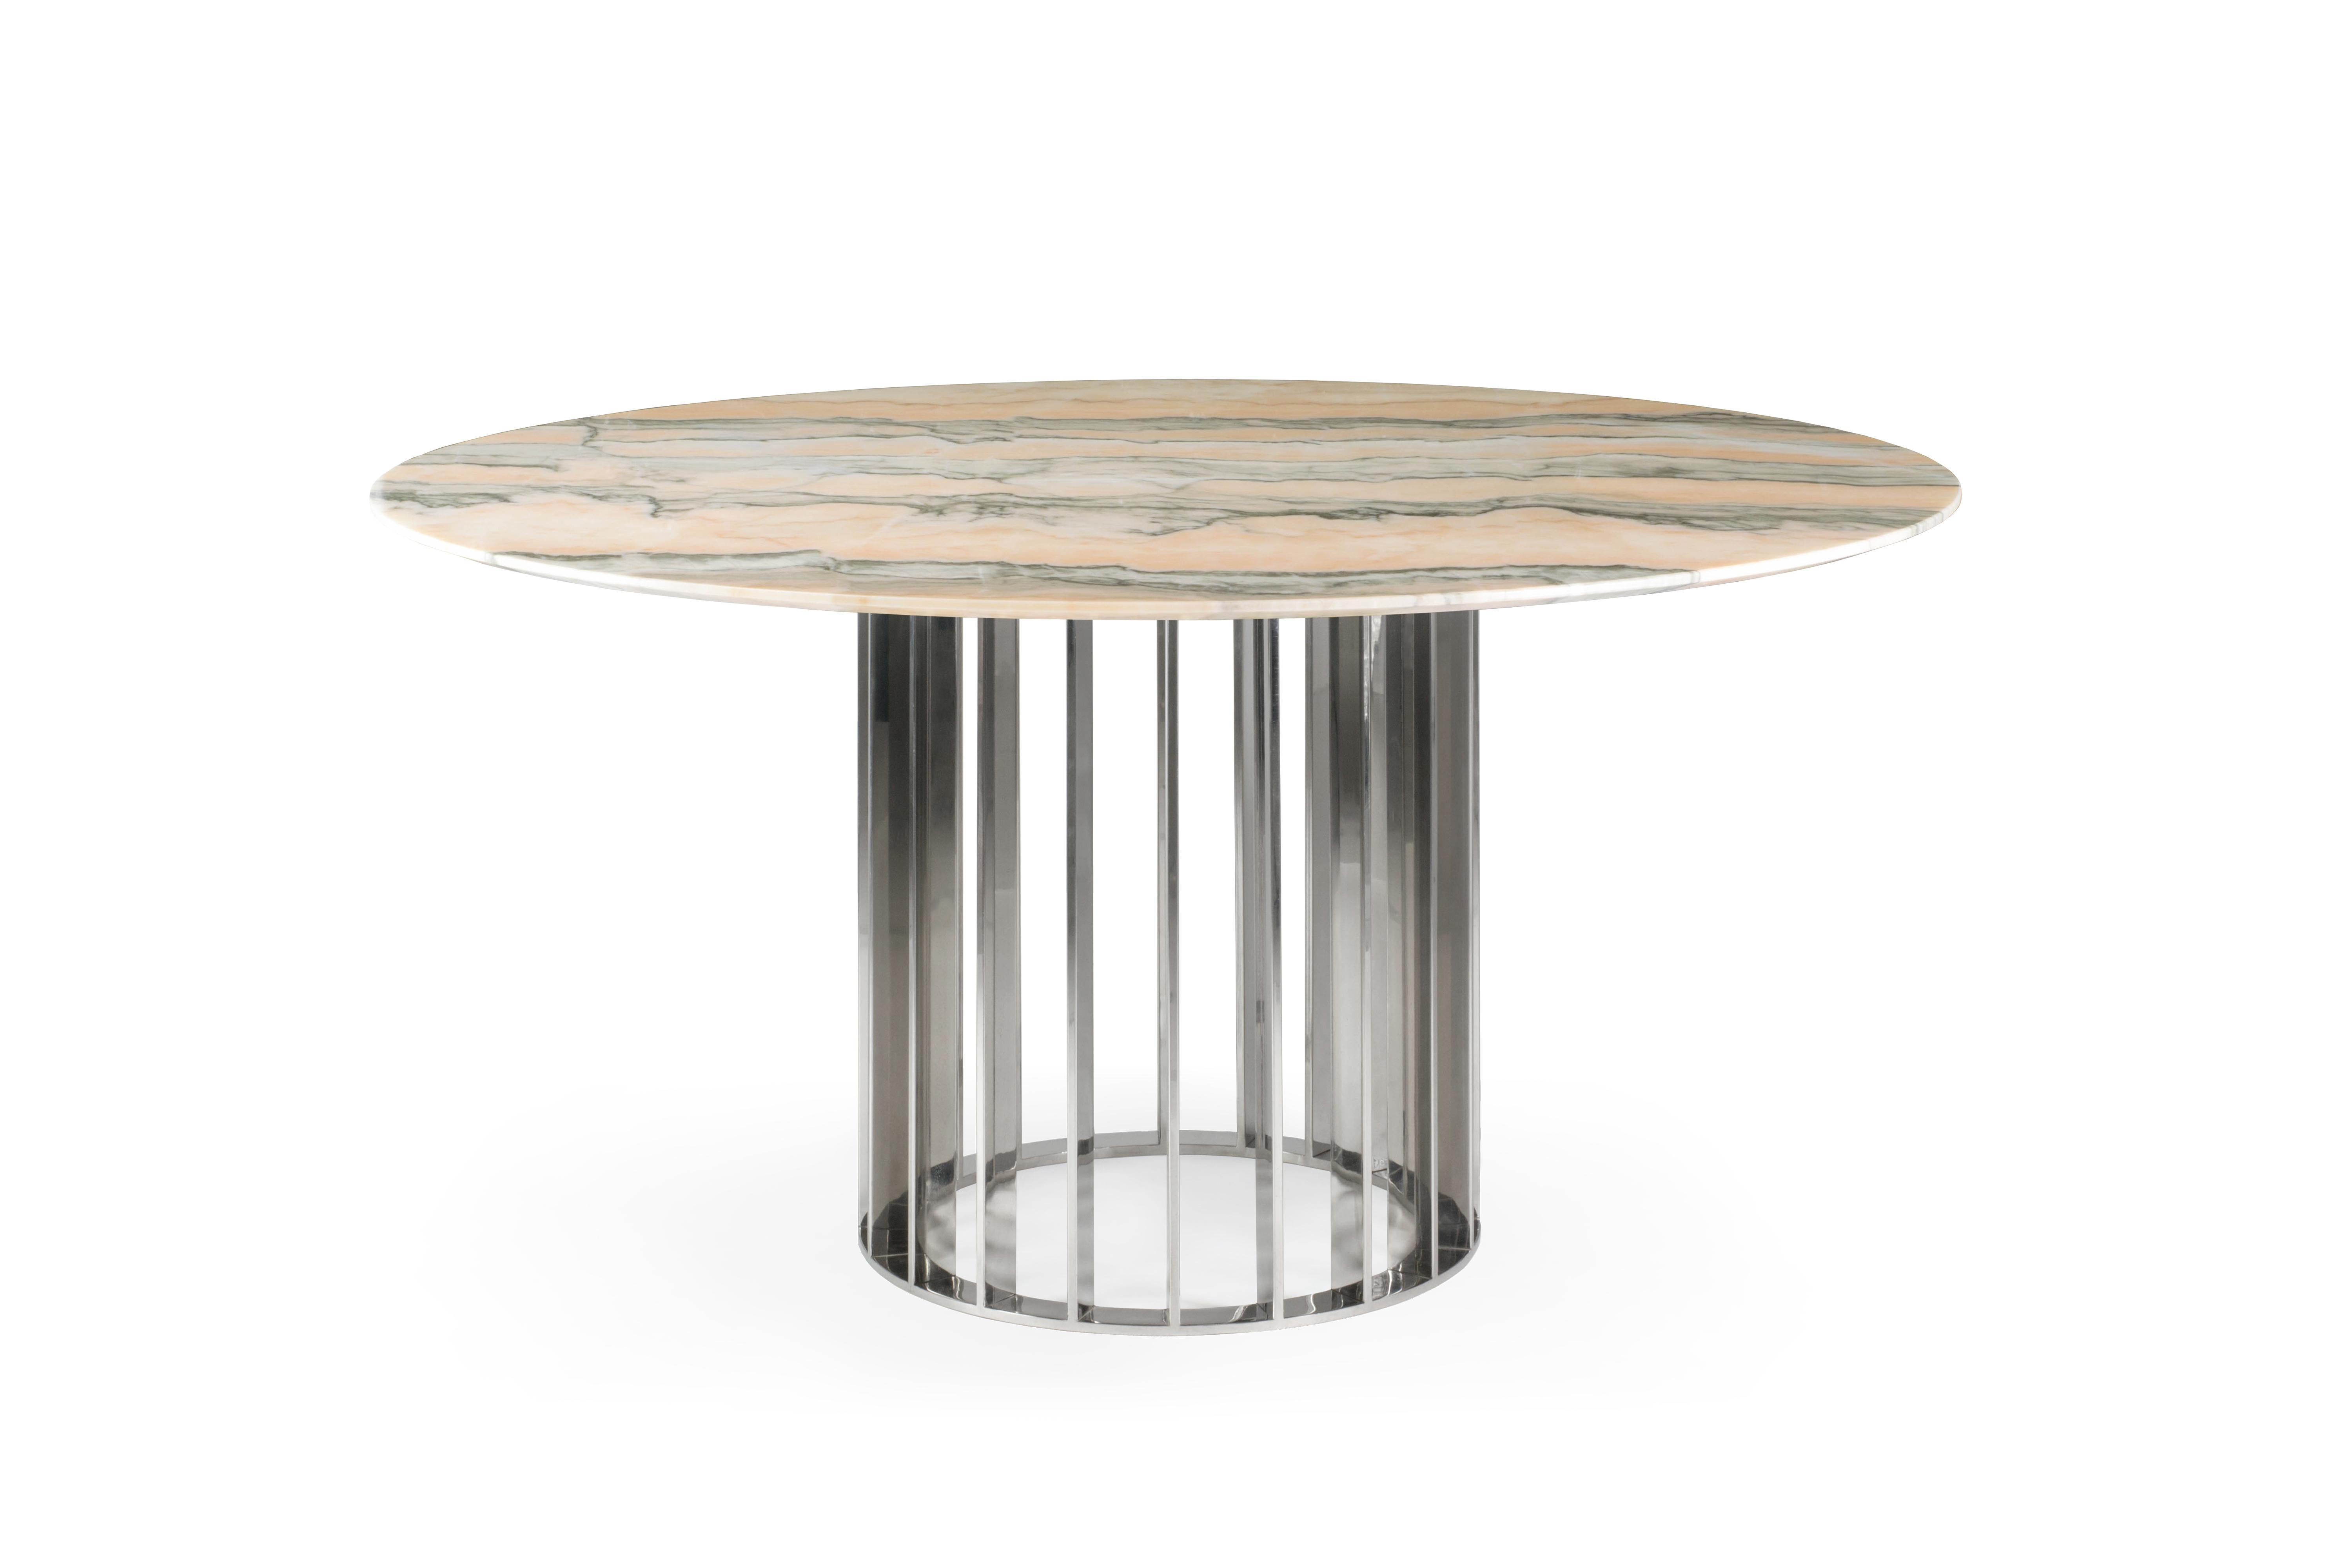 Portuguese Rose Marble Stainless Steel Dining Table For Sale